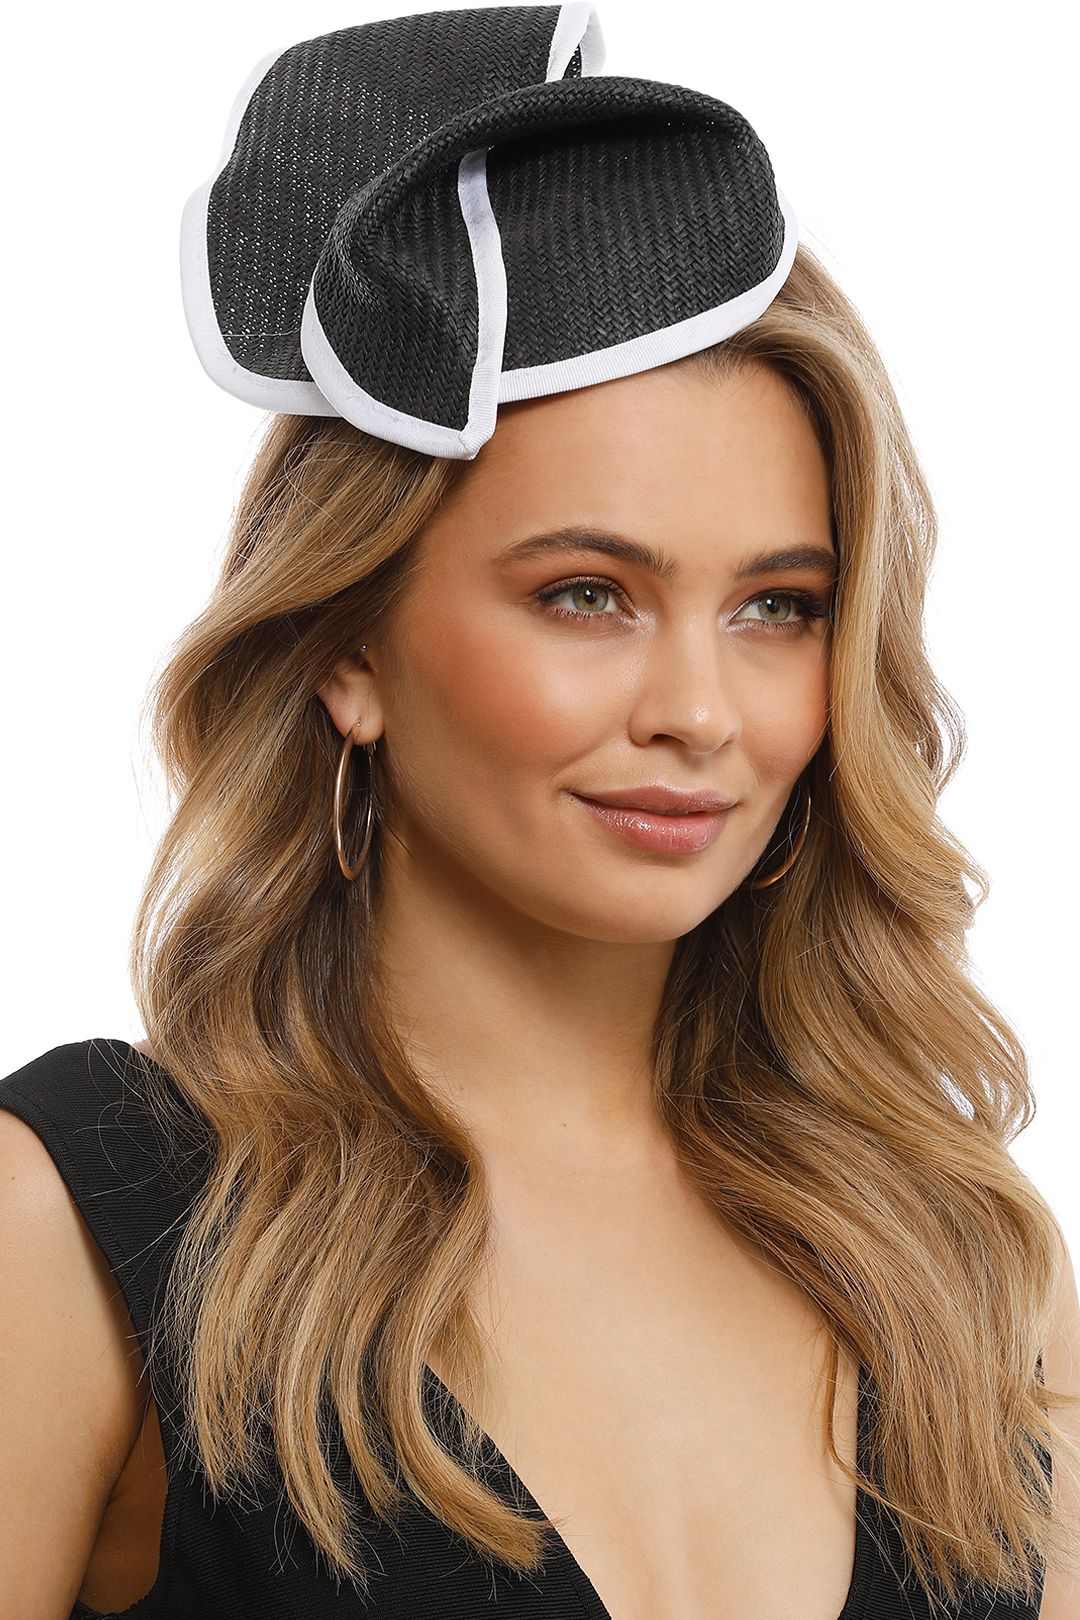 Max Alexander - Twisted Pillbox Fascinator - Black and White - Front Model